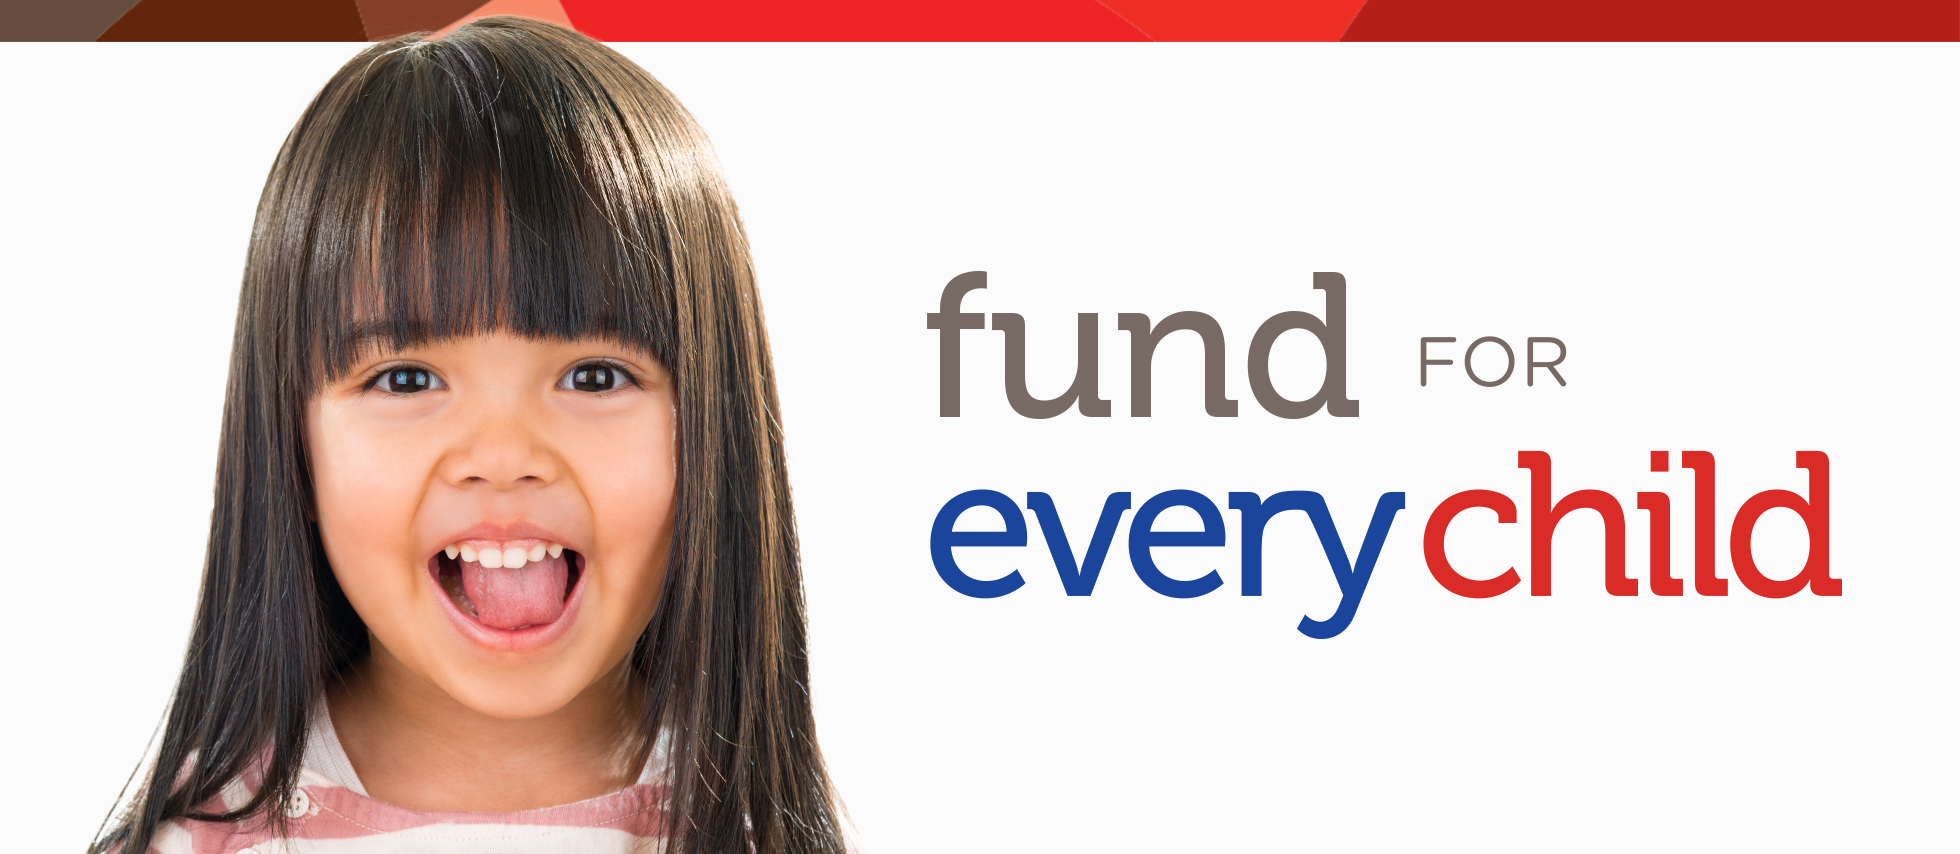 Fund for Every Child header